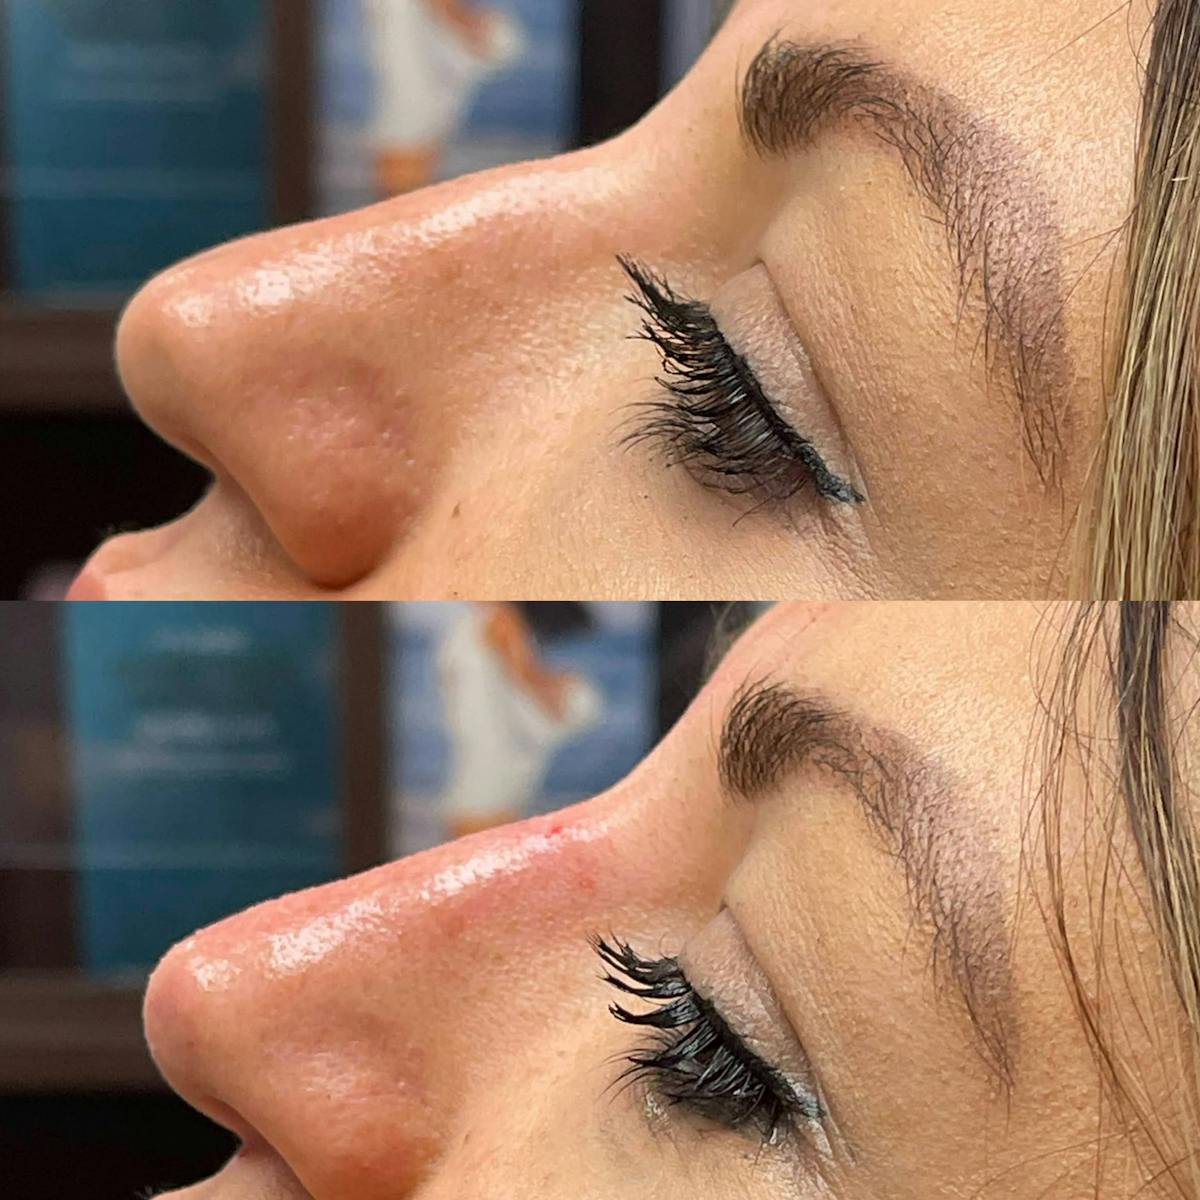 Non-Surgical Rhinoplasty Gallery Before & After Gallery - Patient 372398 - Image 1